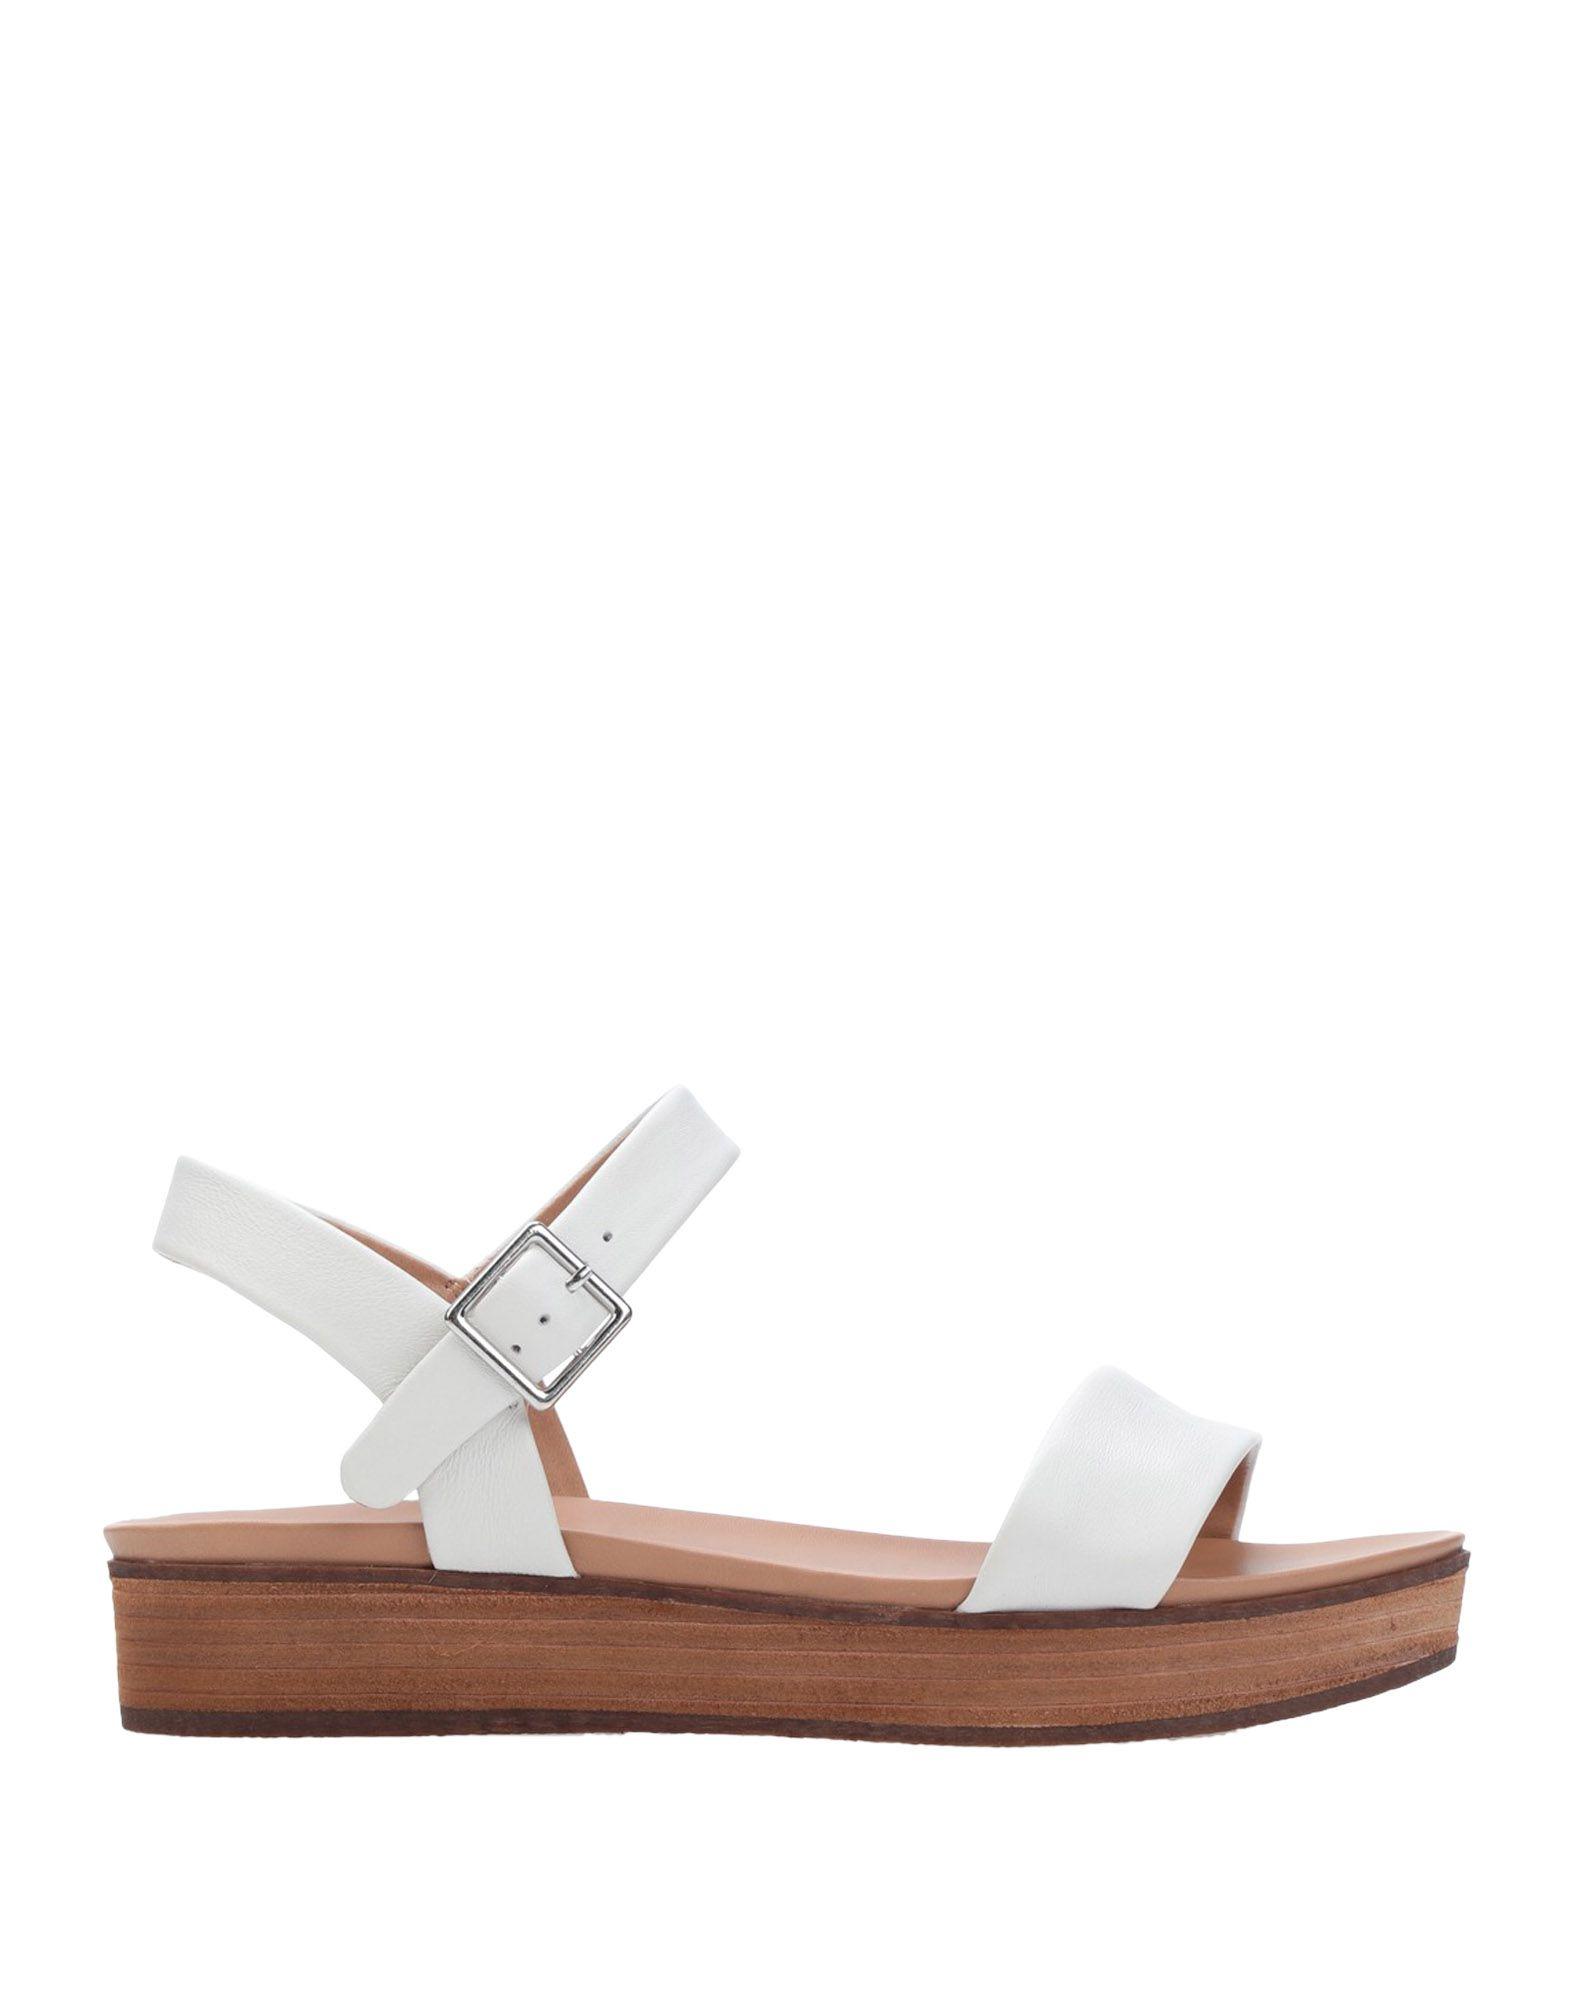 Dune Leather Sandals in White - Lyst